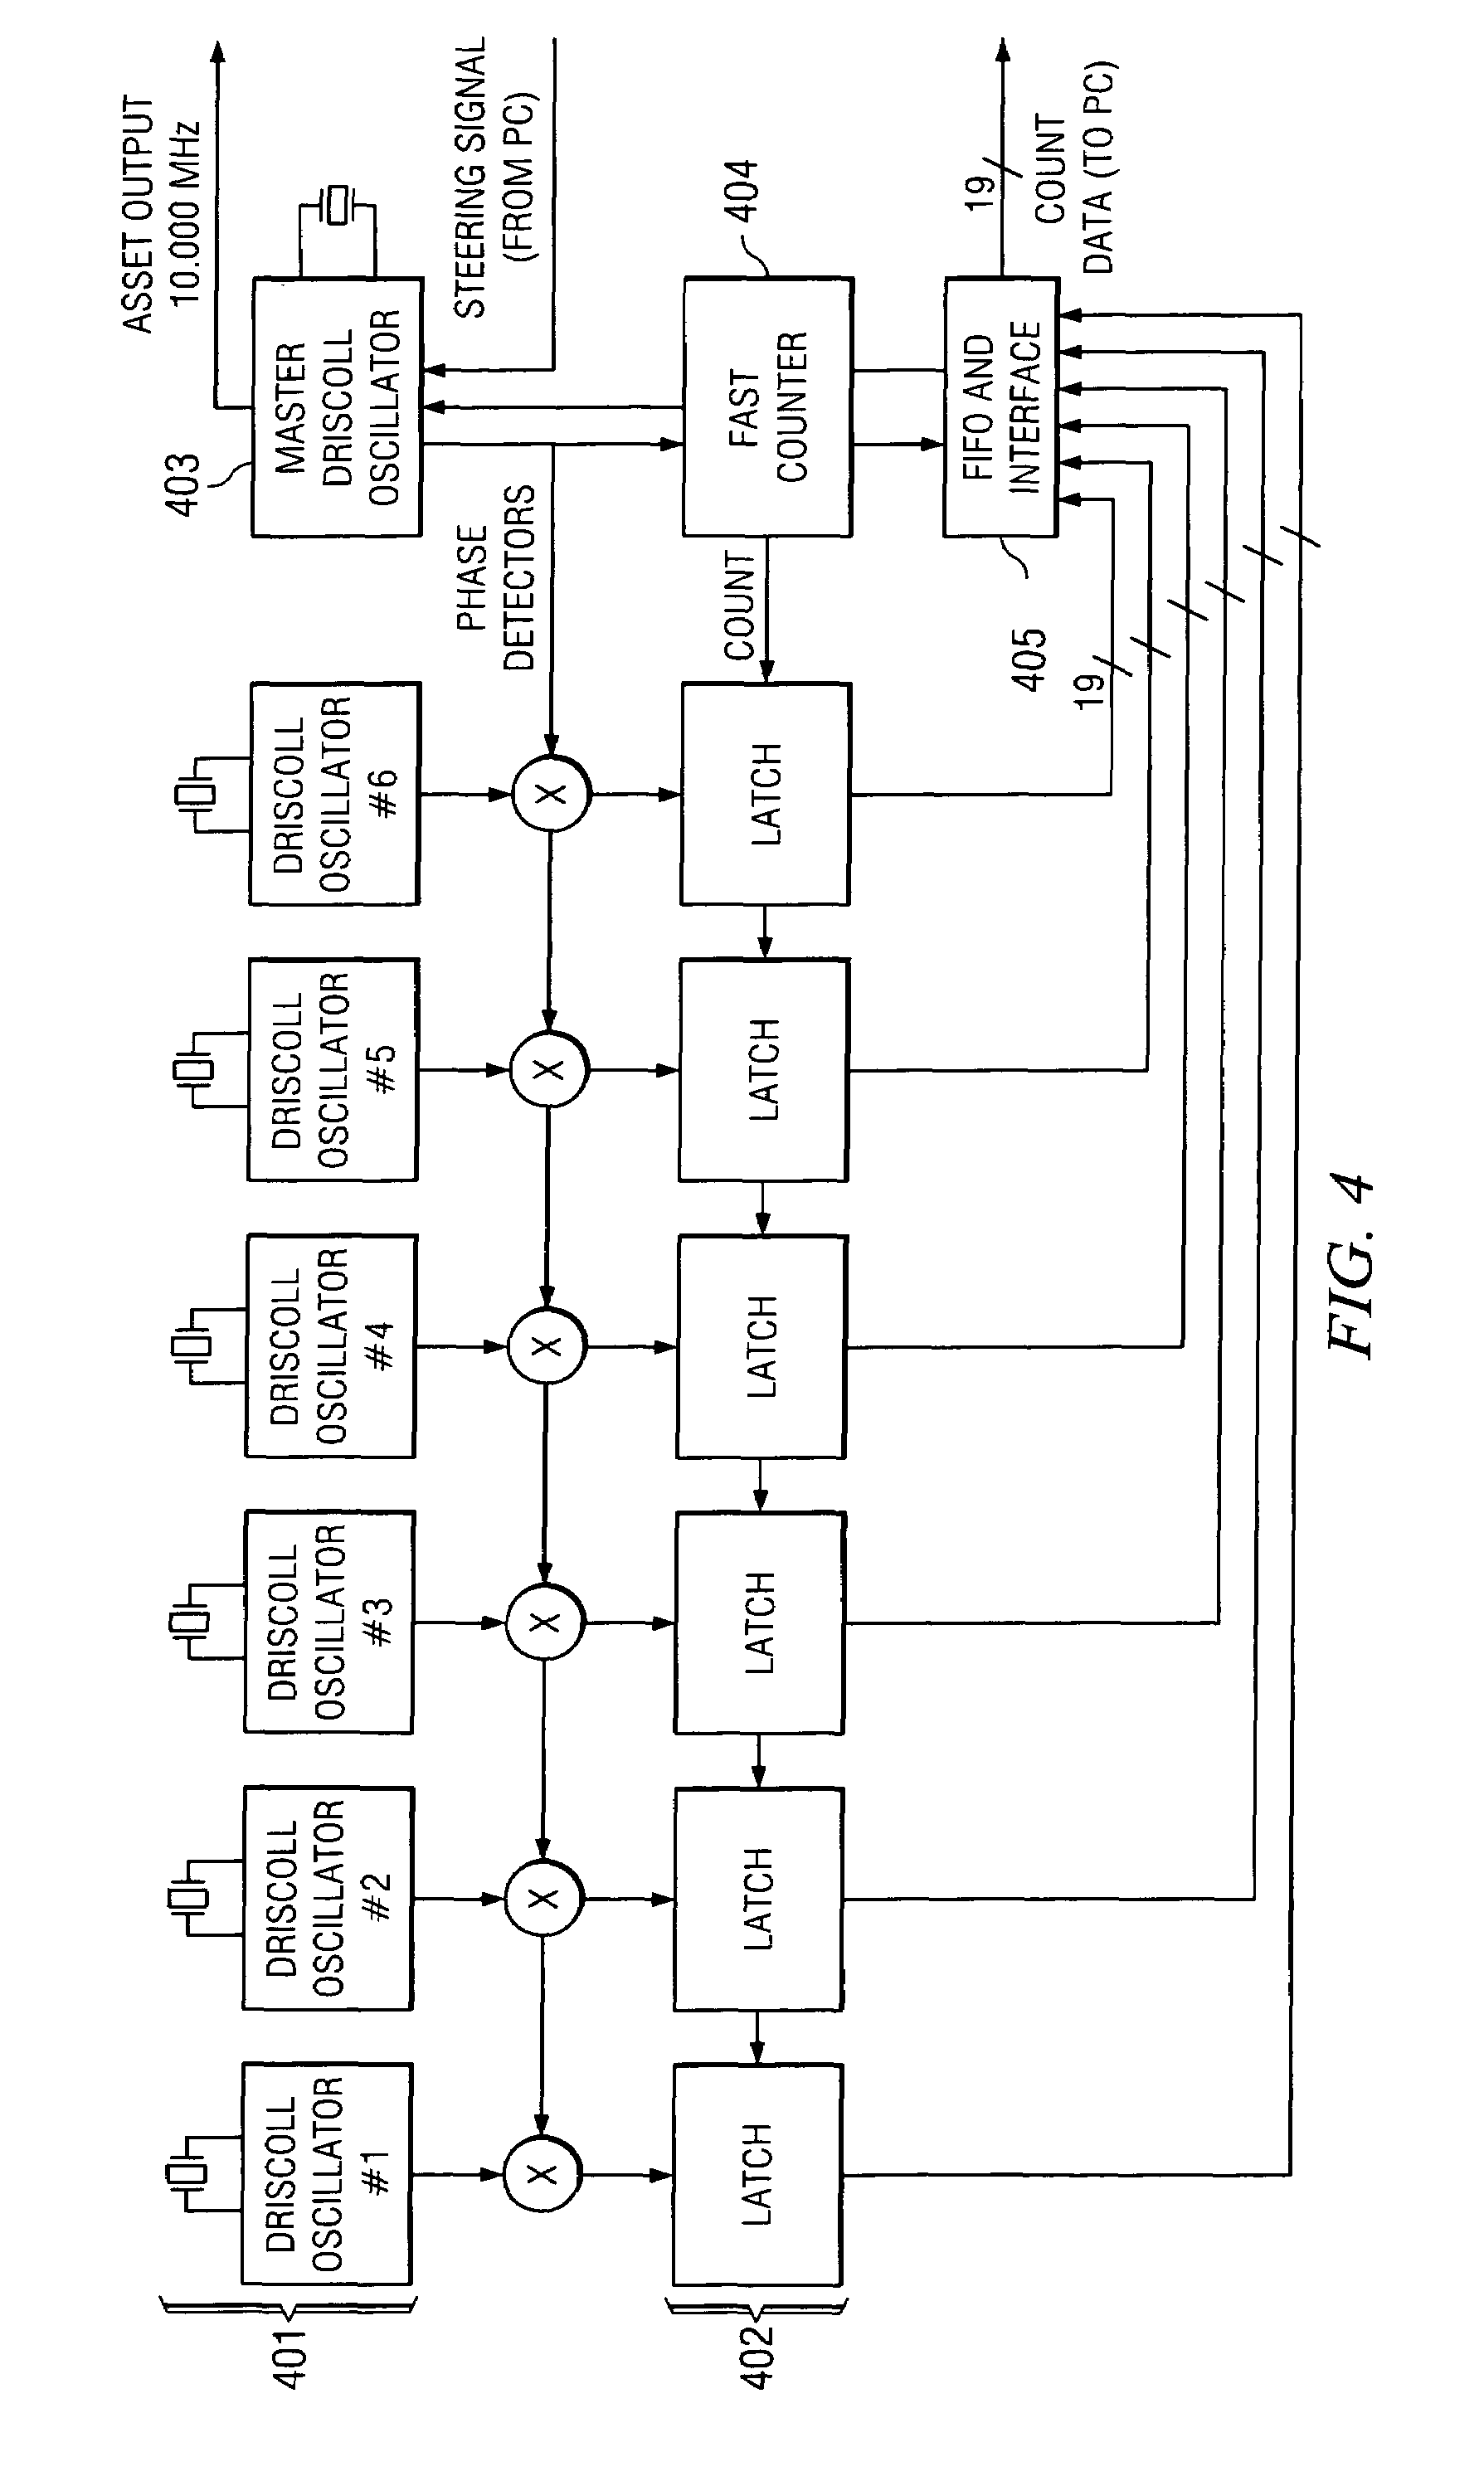 Robust low-frequency spread-spectrum navigation system